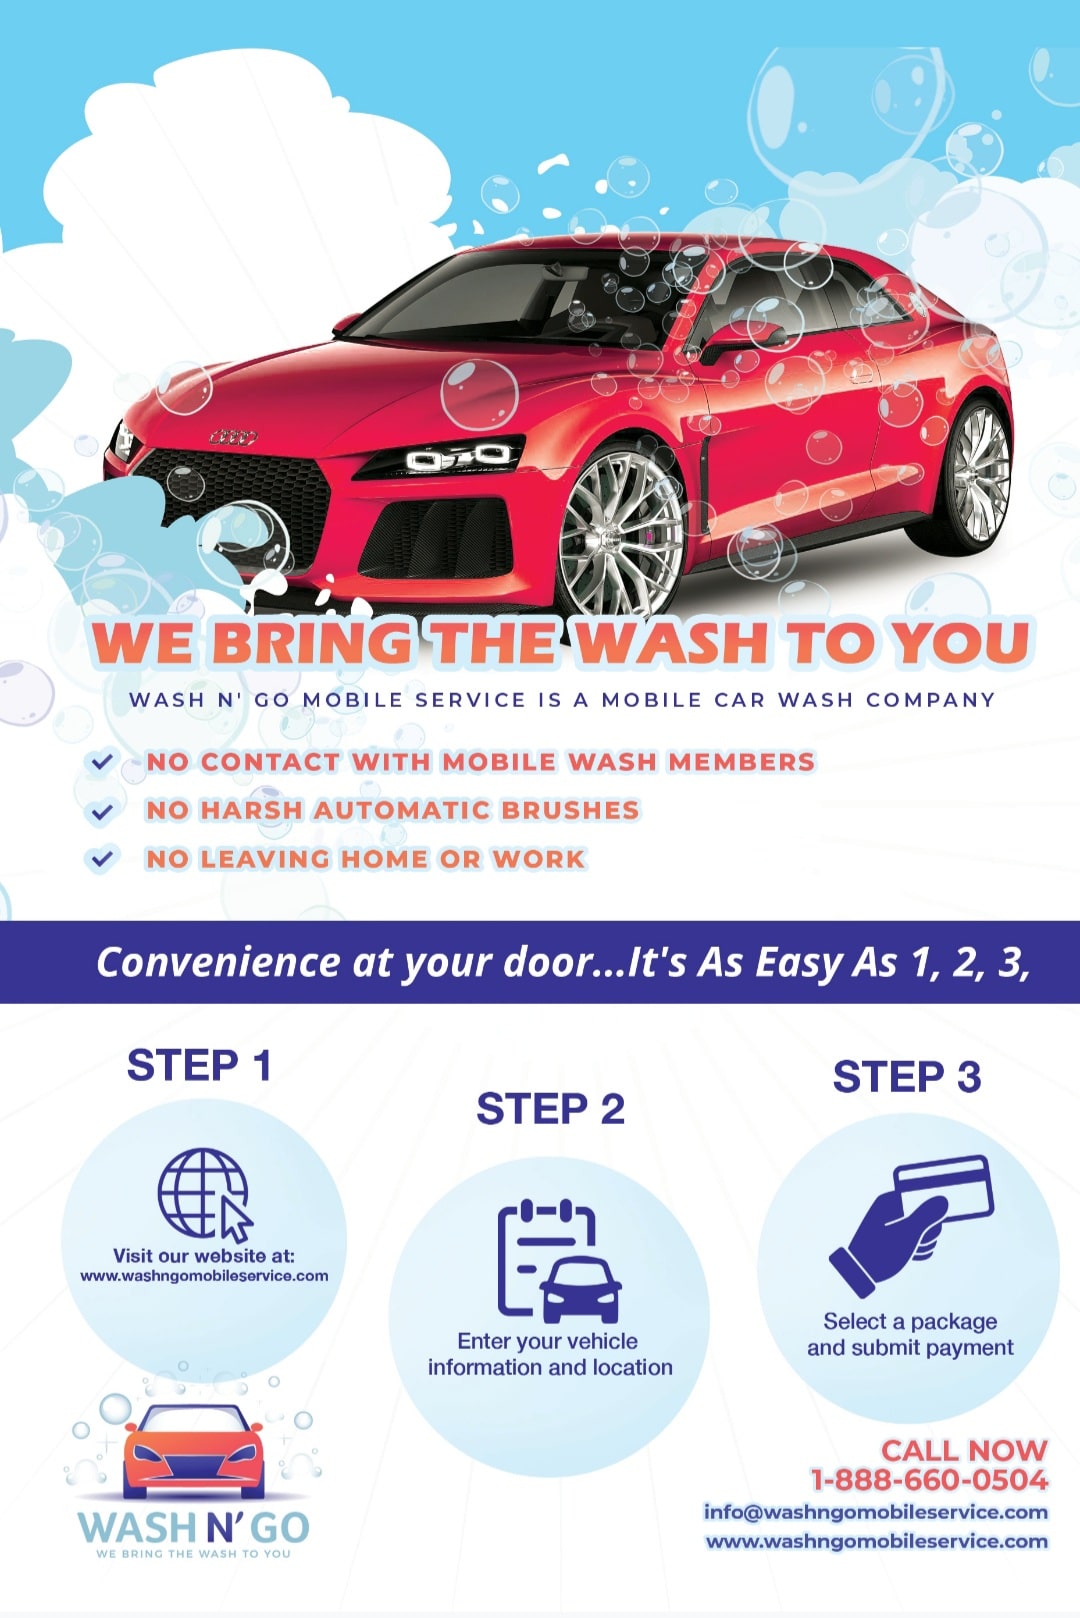 A flyer promoting a car wash service conveniently located near apartments in The Woodlands, TX.